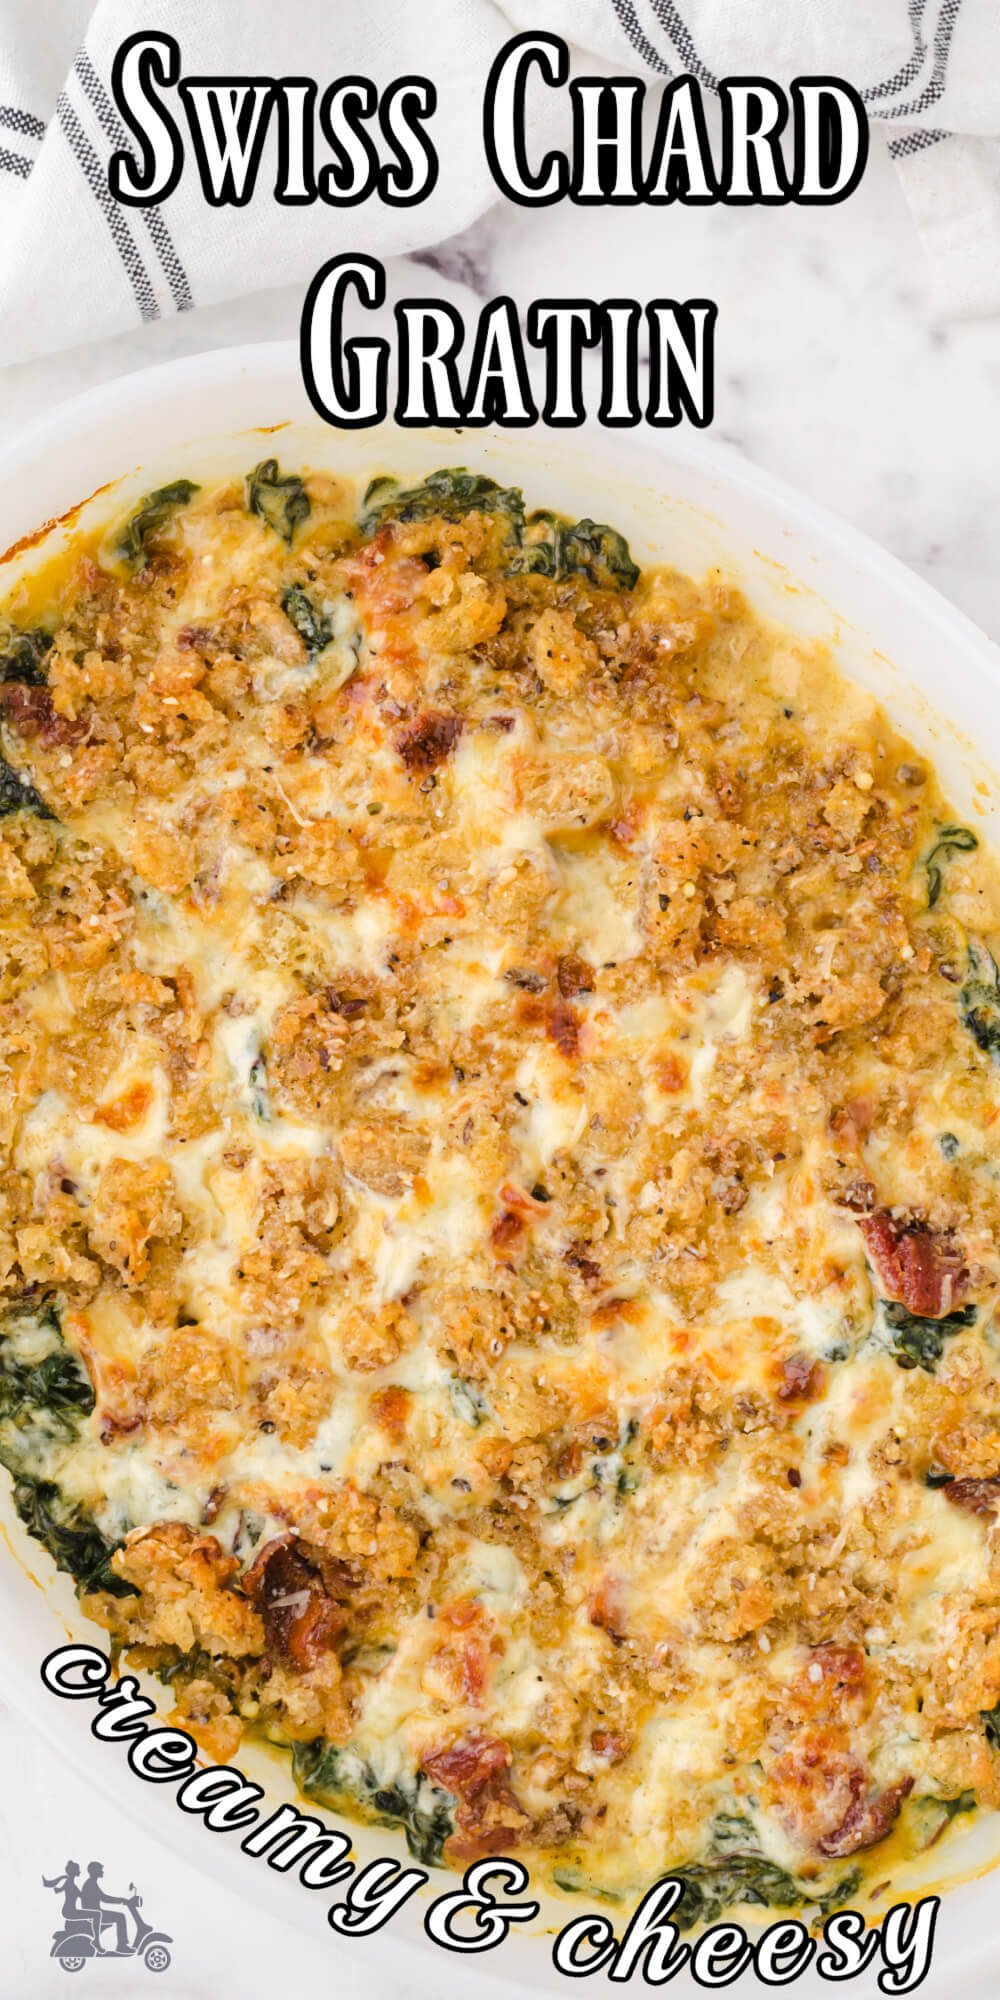 This is one of the best Swiss Chard Recipes you can make. The mild tasting winter green is mixed with cream infused with garlic and topped with salty bacon or prosciutto , sprinkled with a combination of Parmesan and Gruyere cheese and topped with homemade buttery breadcrumbs. Swiss Chard Gratin is the perfect holiday side but it's so delicious it should be served often. This winter green gratin compliments any meat you serve it with.